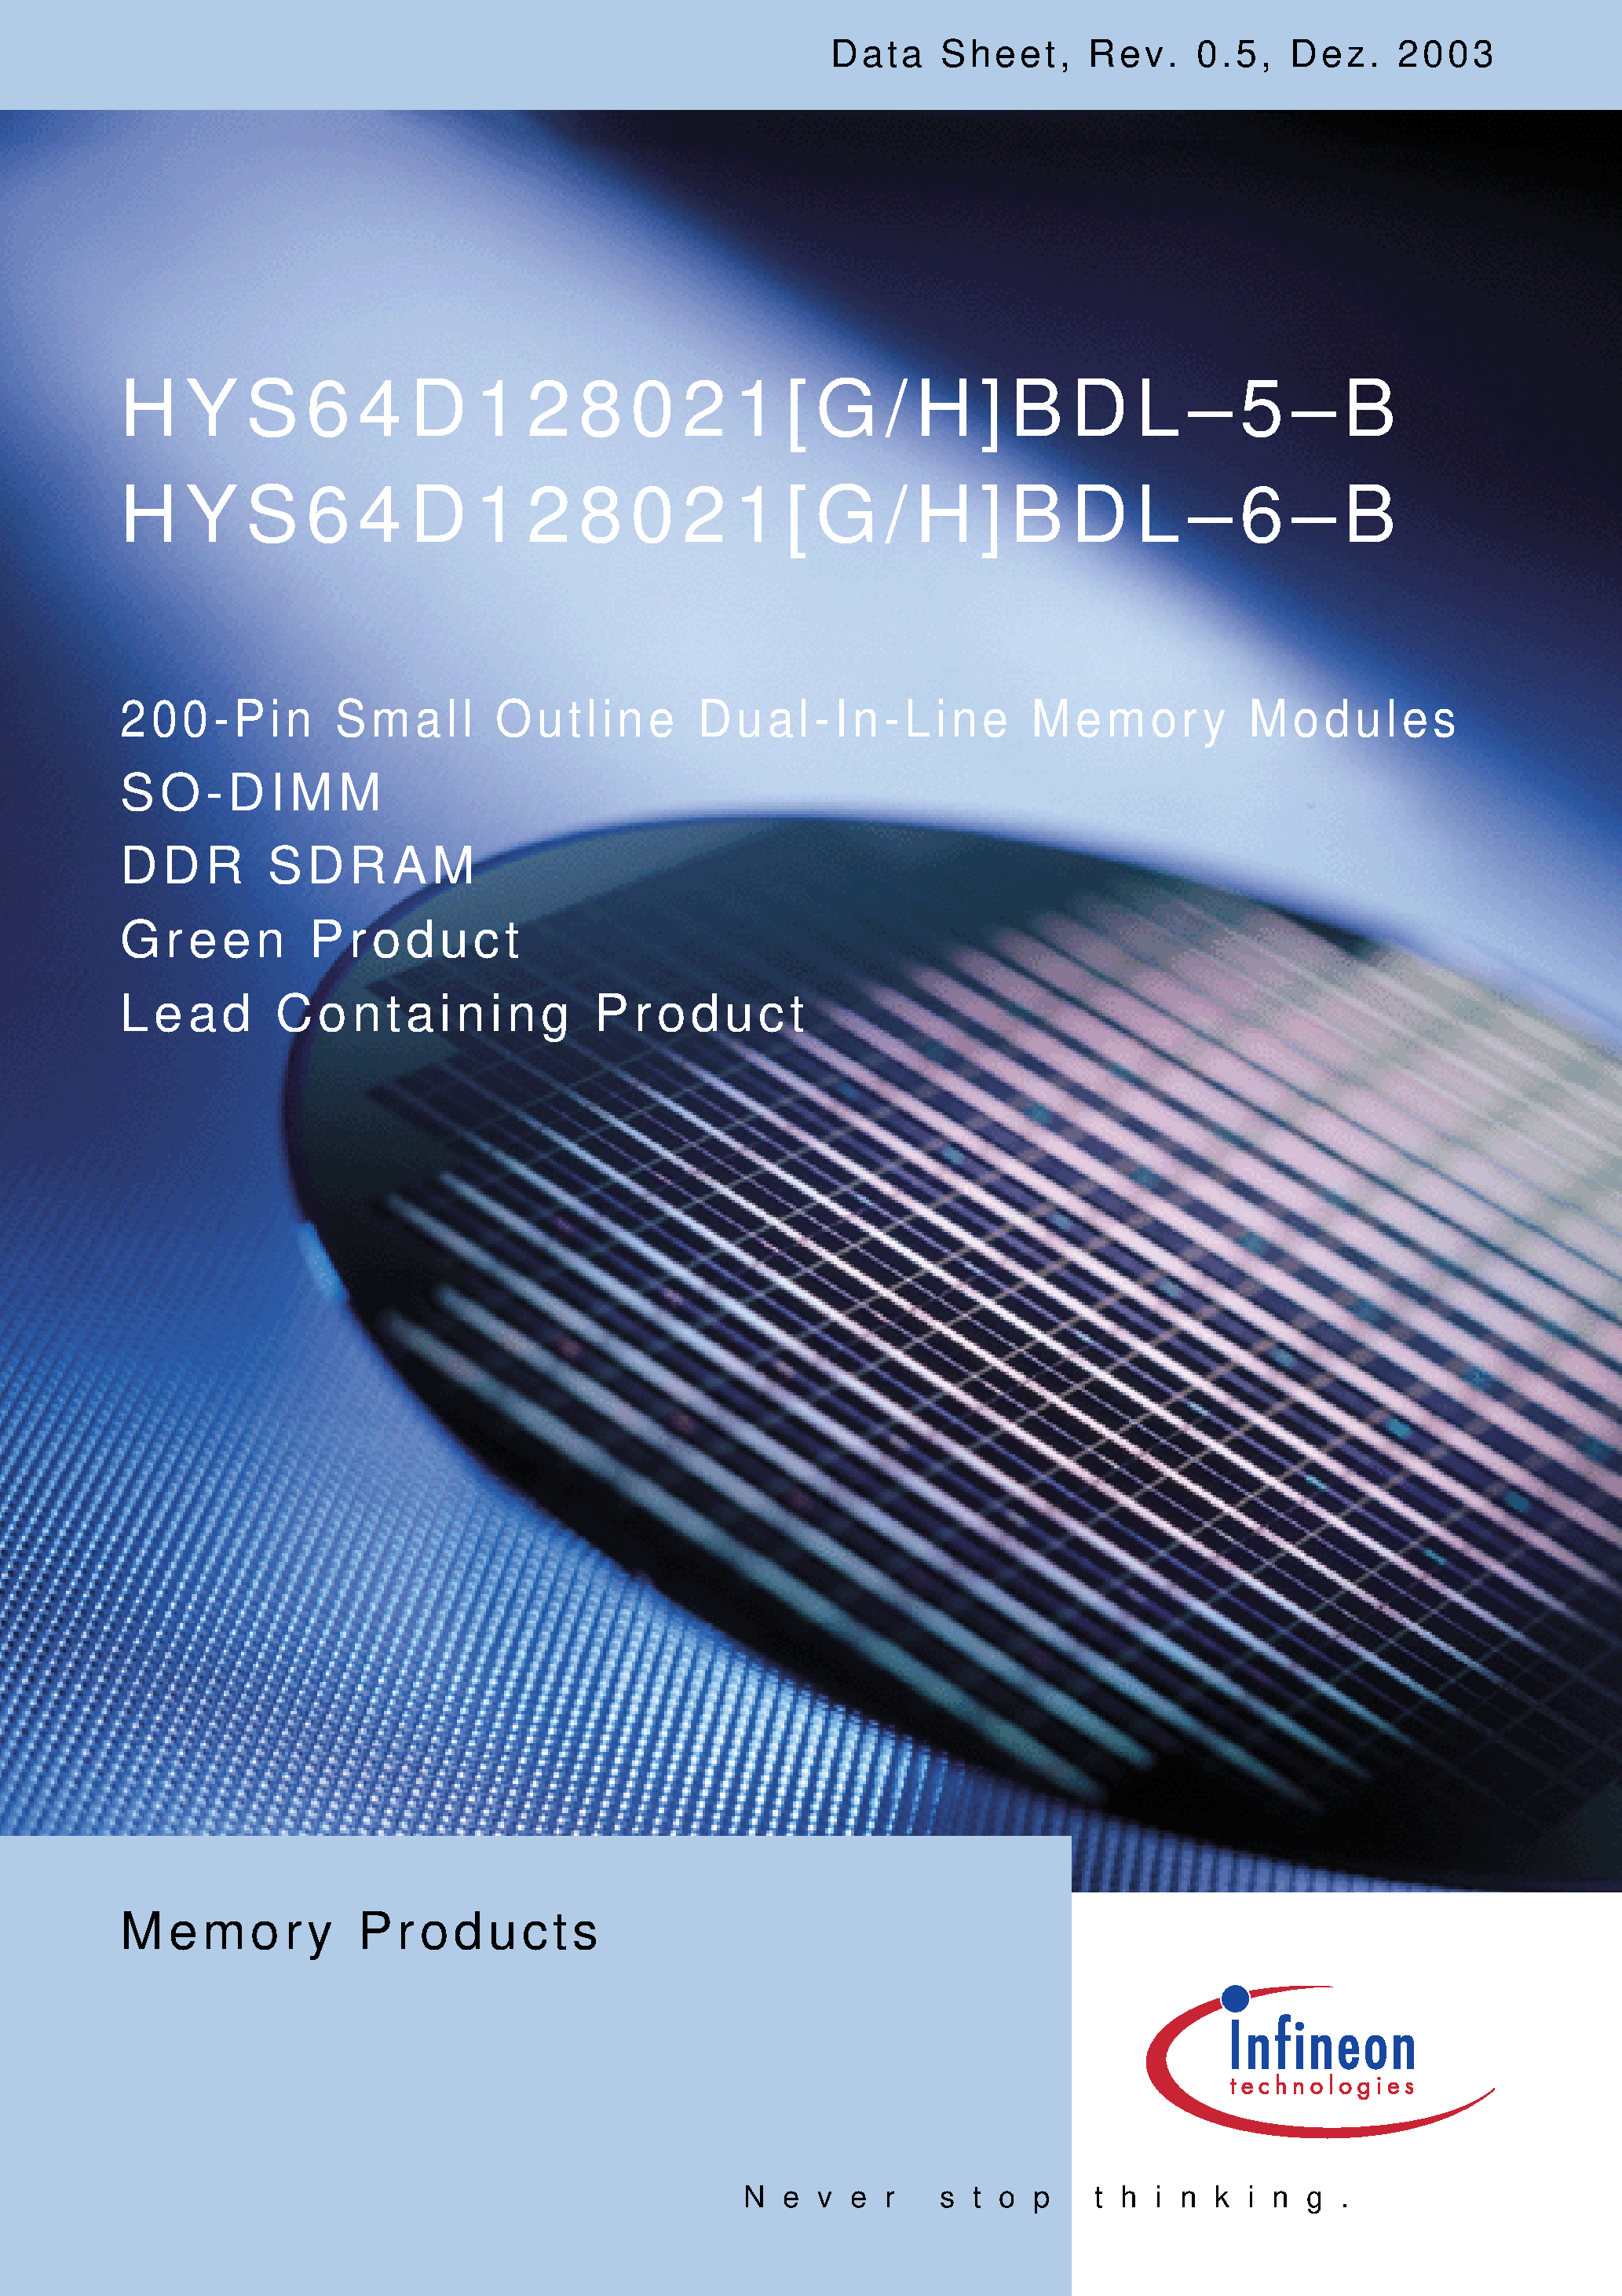 Datasheet HYS64D128021HBDL-6-B - 200-Pin Small Outline Dual-In-Line Memory Modules page 1